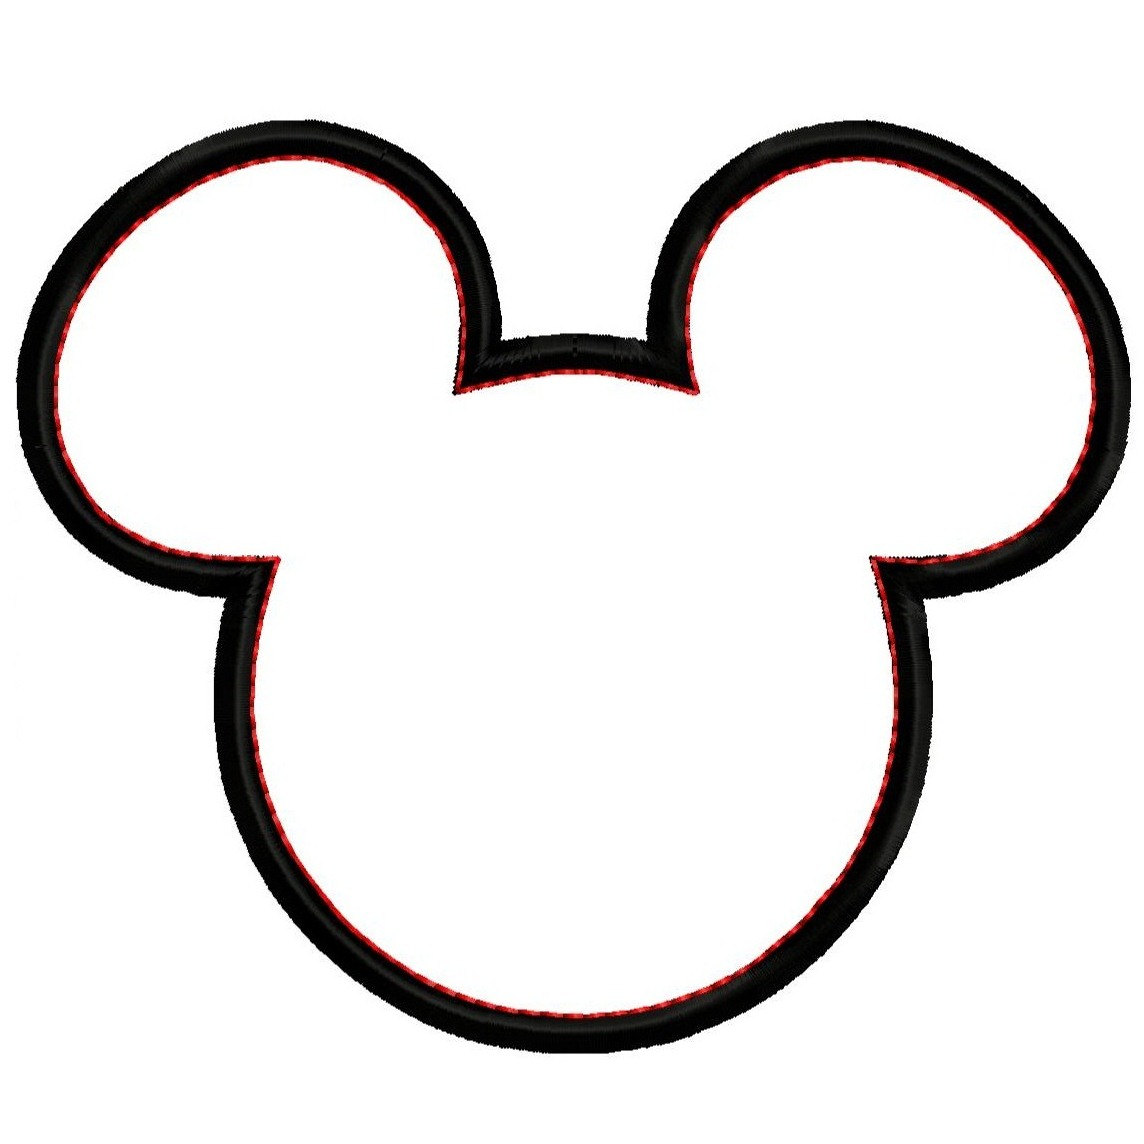 free-picture-of-mickey-mouse-head-download-free-picture-of-mickey